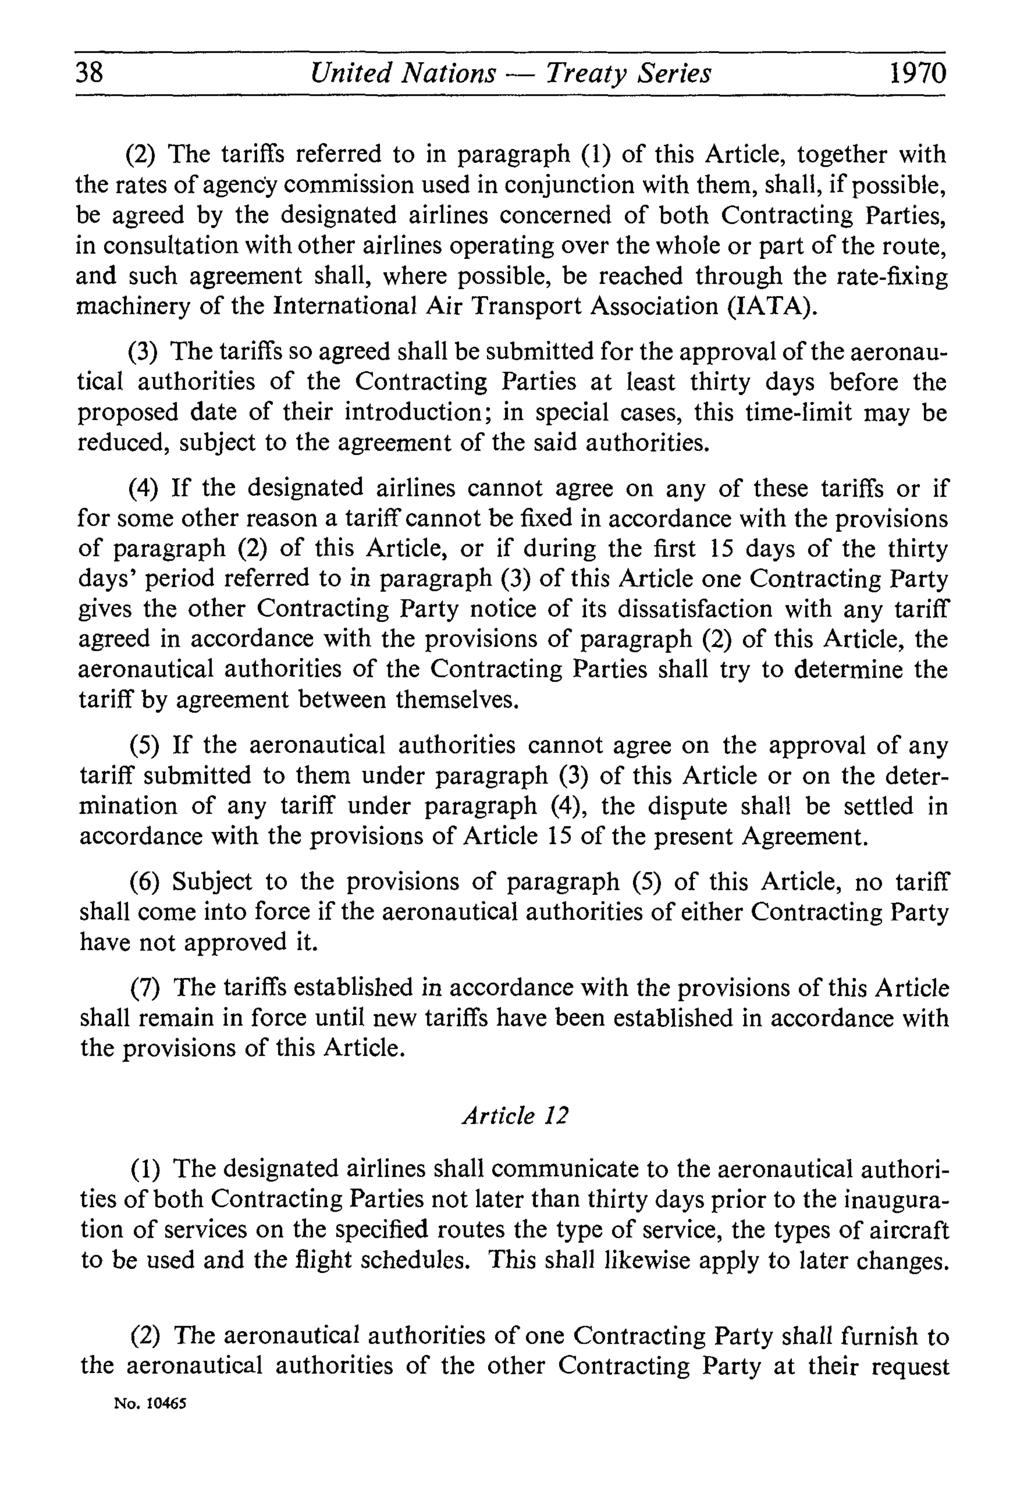 38 United Nations Treaty Series 1970 (2) The tariffs referred to in paragraph (1) of this Article, together with the rates of agenc'y commission used in conjunction with them, shall, if possible, be